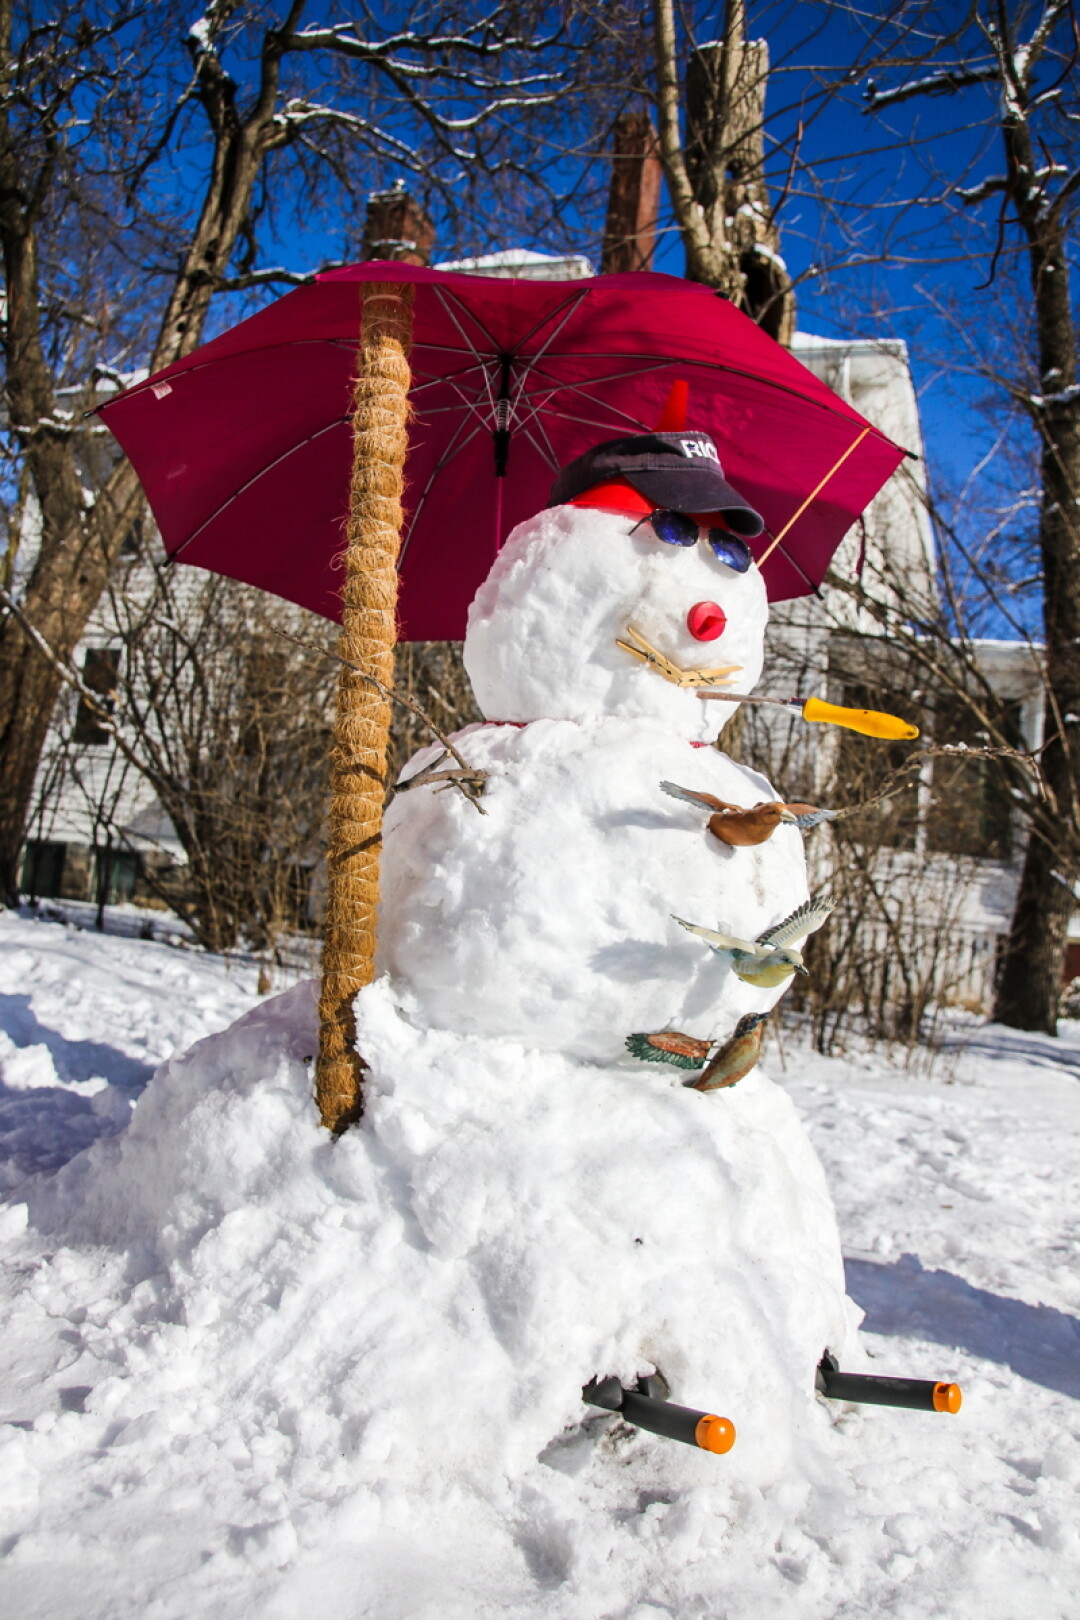 MADE IN THE SHADE. If the sun hasn’t been too cruel, you’ll still be able to find this delightful snowman on North Dewey Street in Eau Claire. Unexpected additions such as an umbrella and a small flock of birds really ramp up the whimsy on this guy.